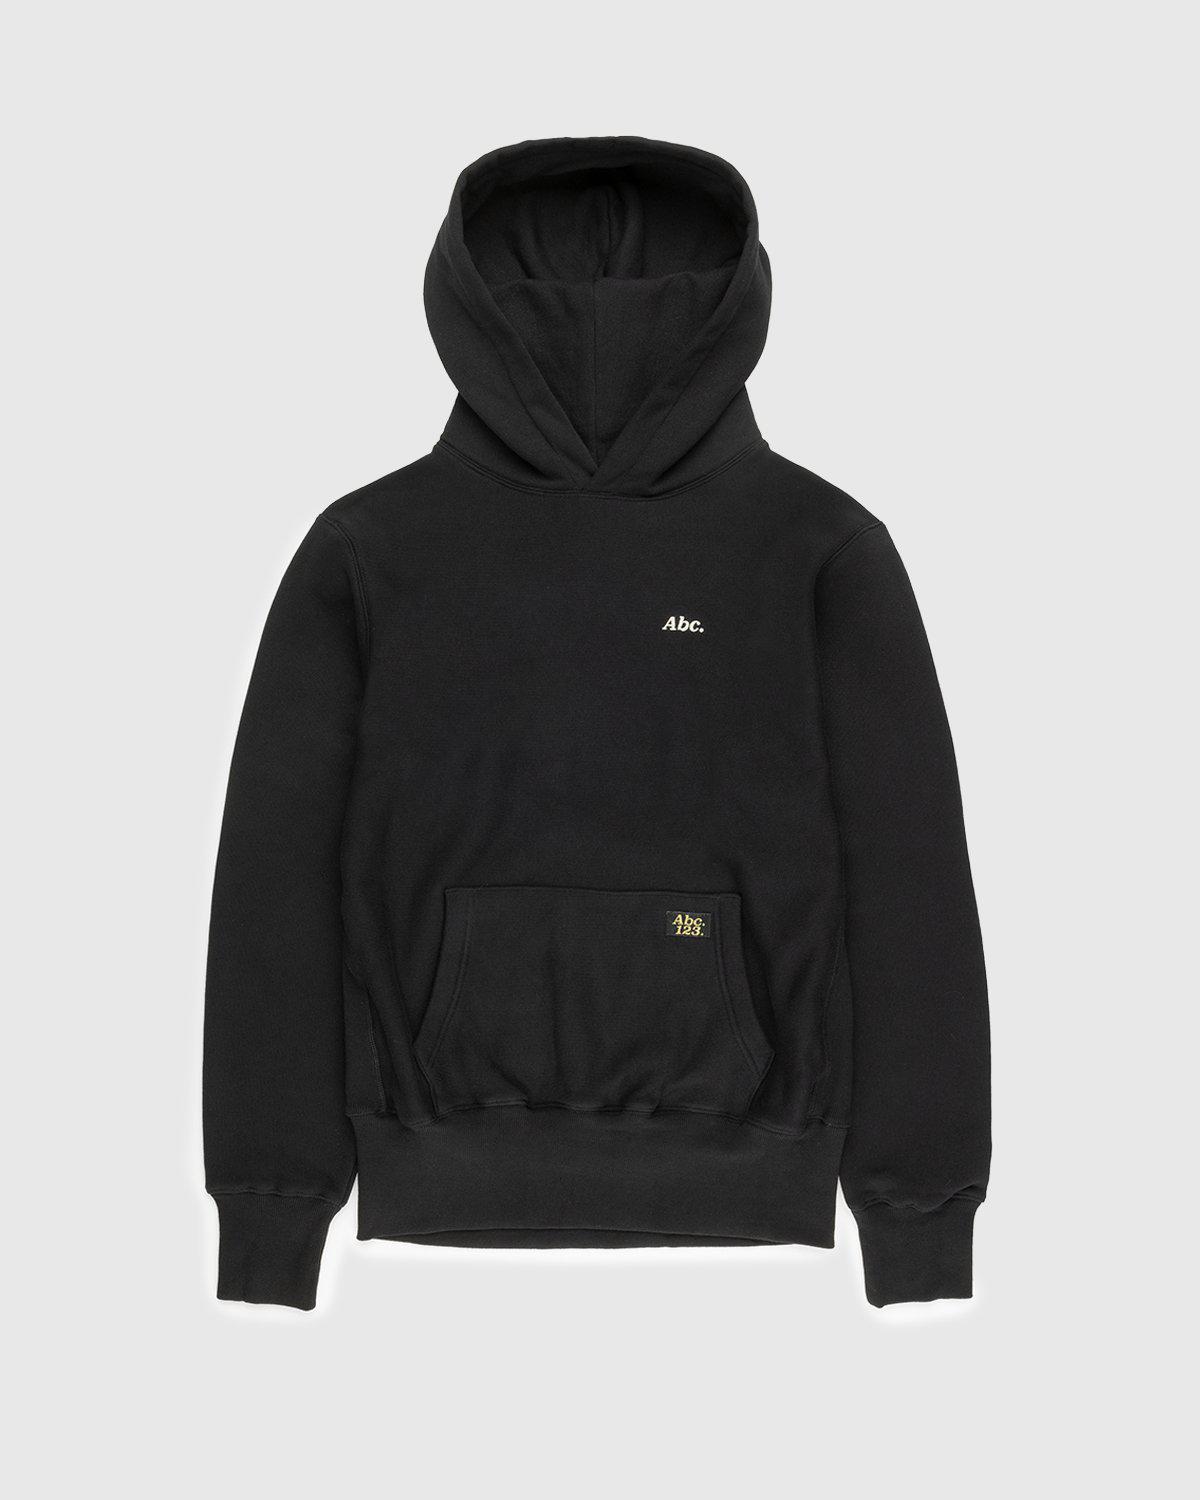 Abc. – Pullover Hoodie Anthracite by ABC.